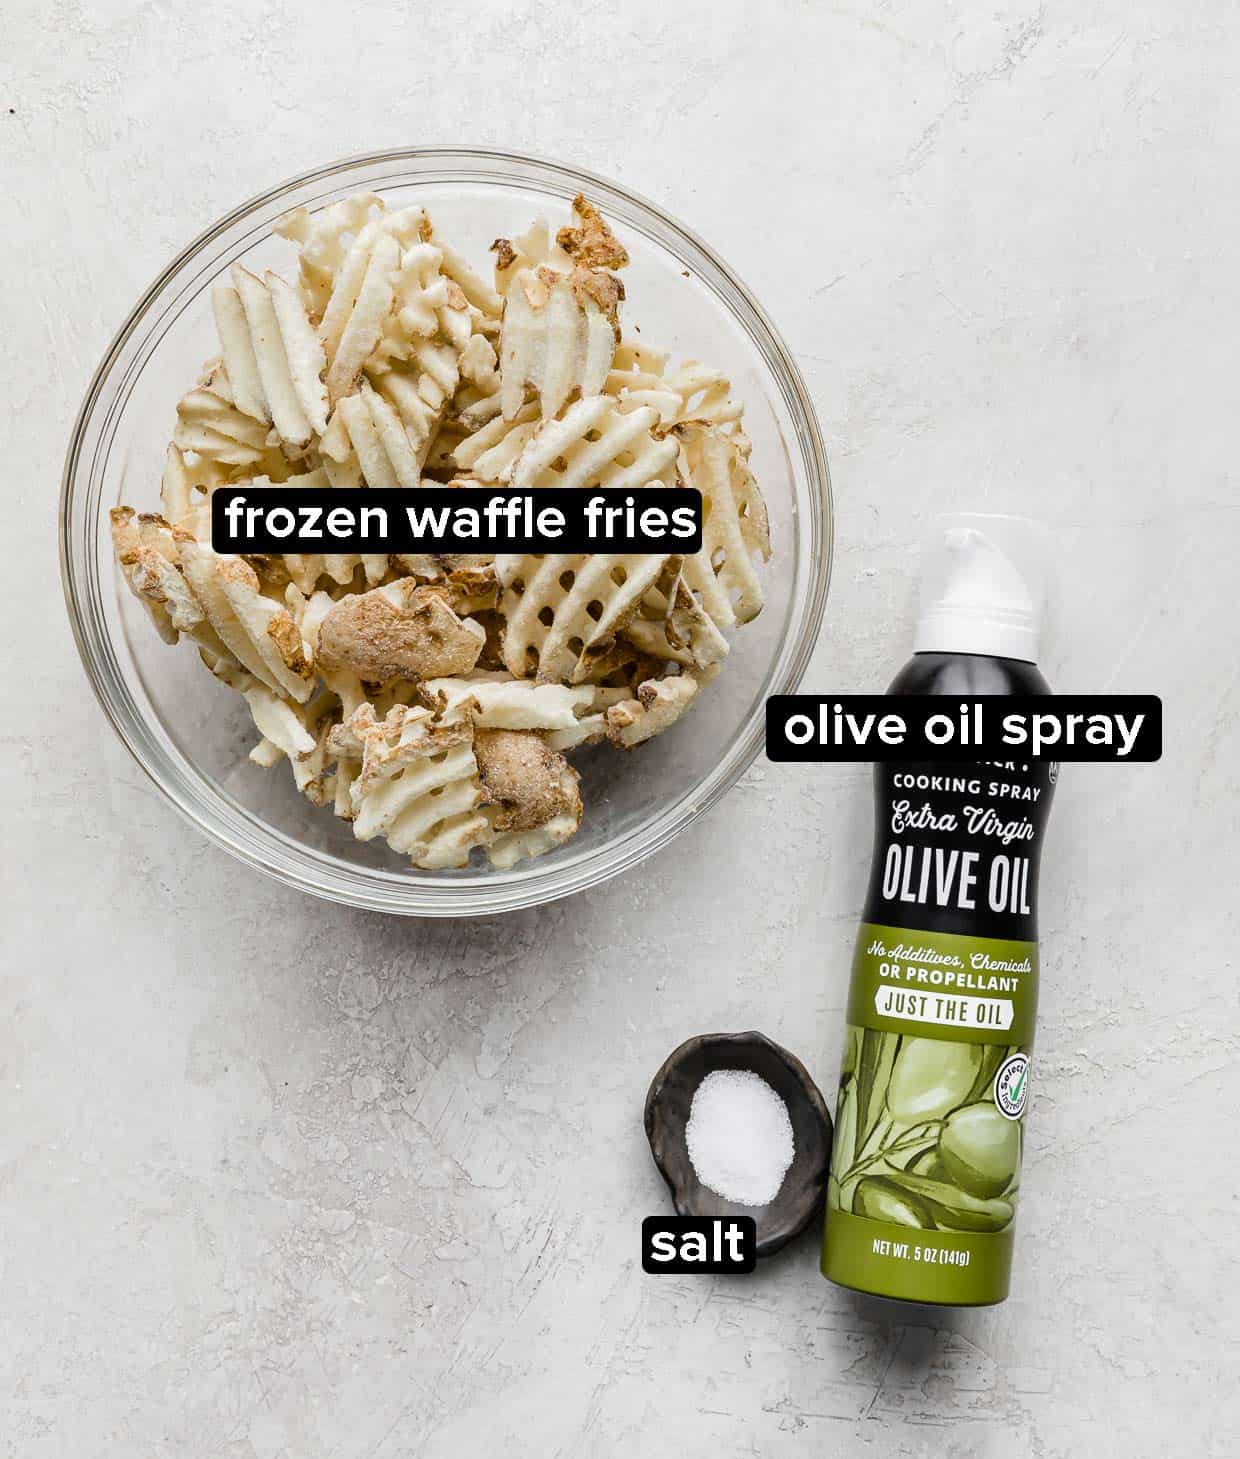 Frozen waffle fries in a glass bowl with a bowl of salt and olive oil spray next to the bowl.